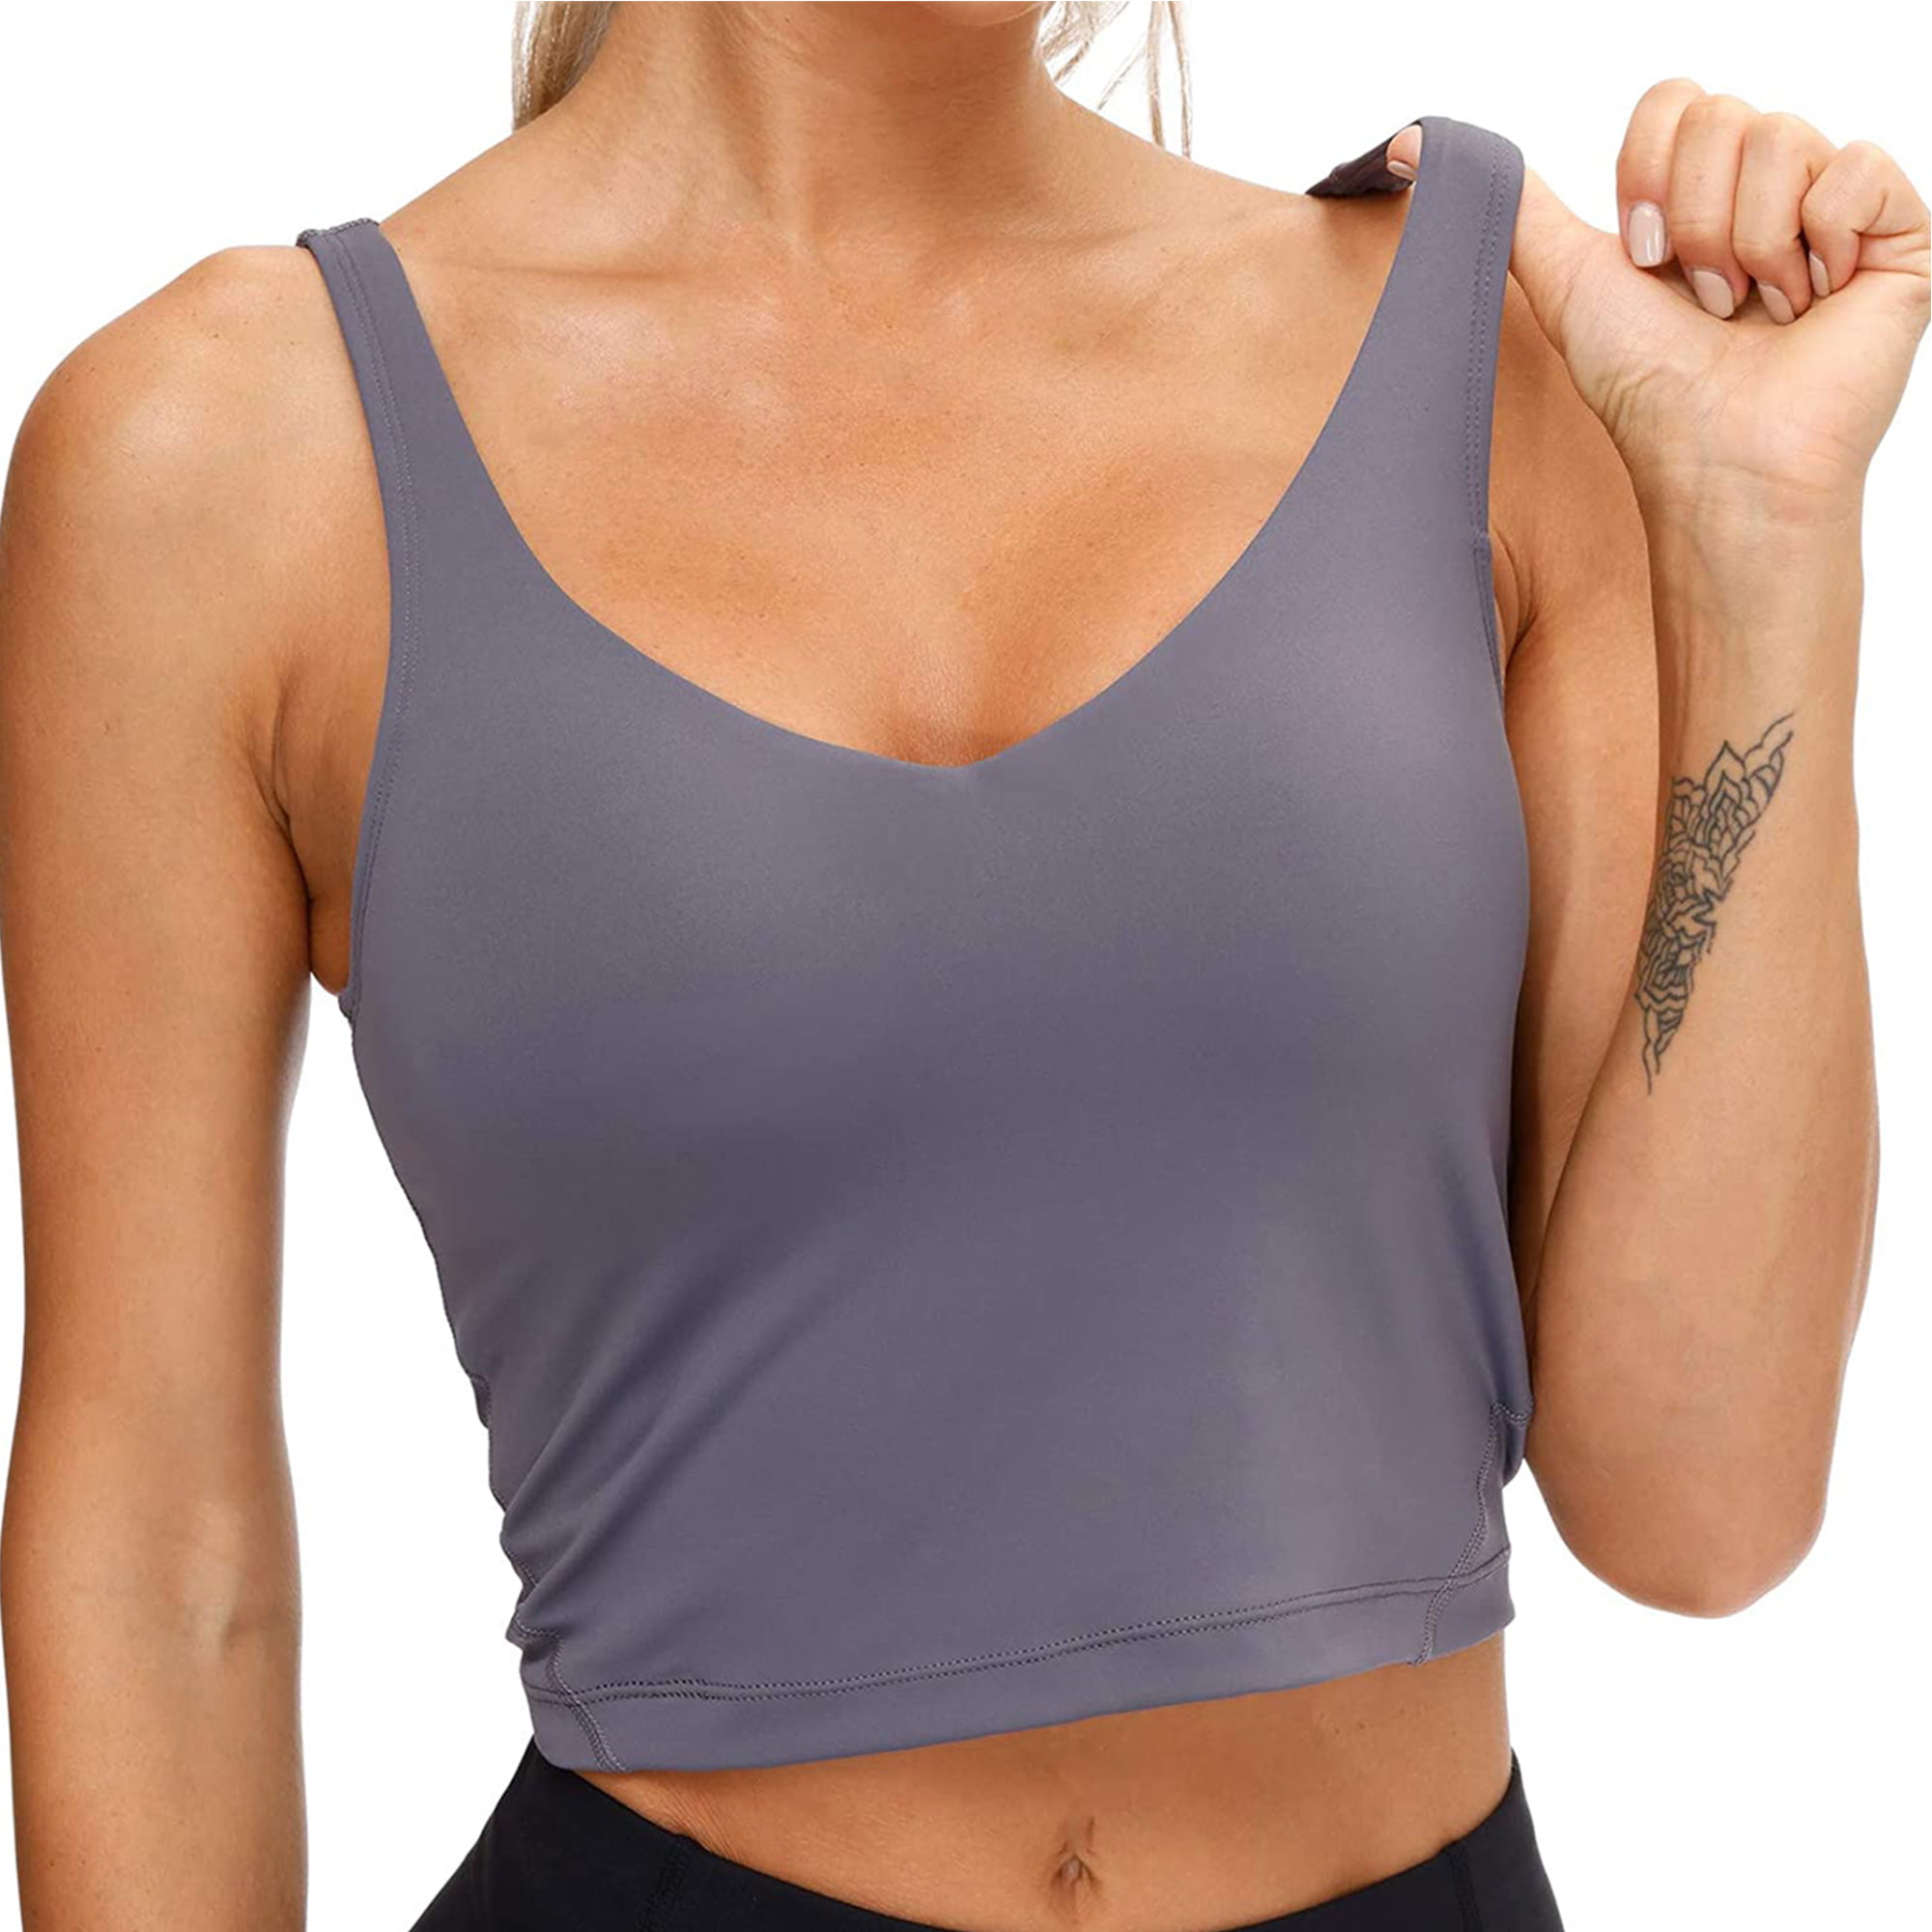 Kydra Athletics - No activewear wardrobe will be complete without a  longline sports bra. True to our Kydra classic sports bras, the Ava  Longline is undeniably soft, stretchy, comfortable, and a must-have.